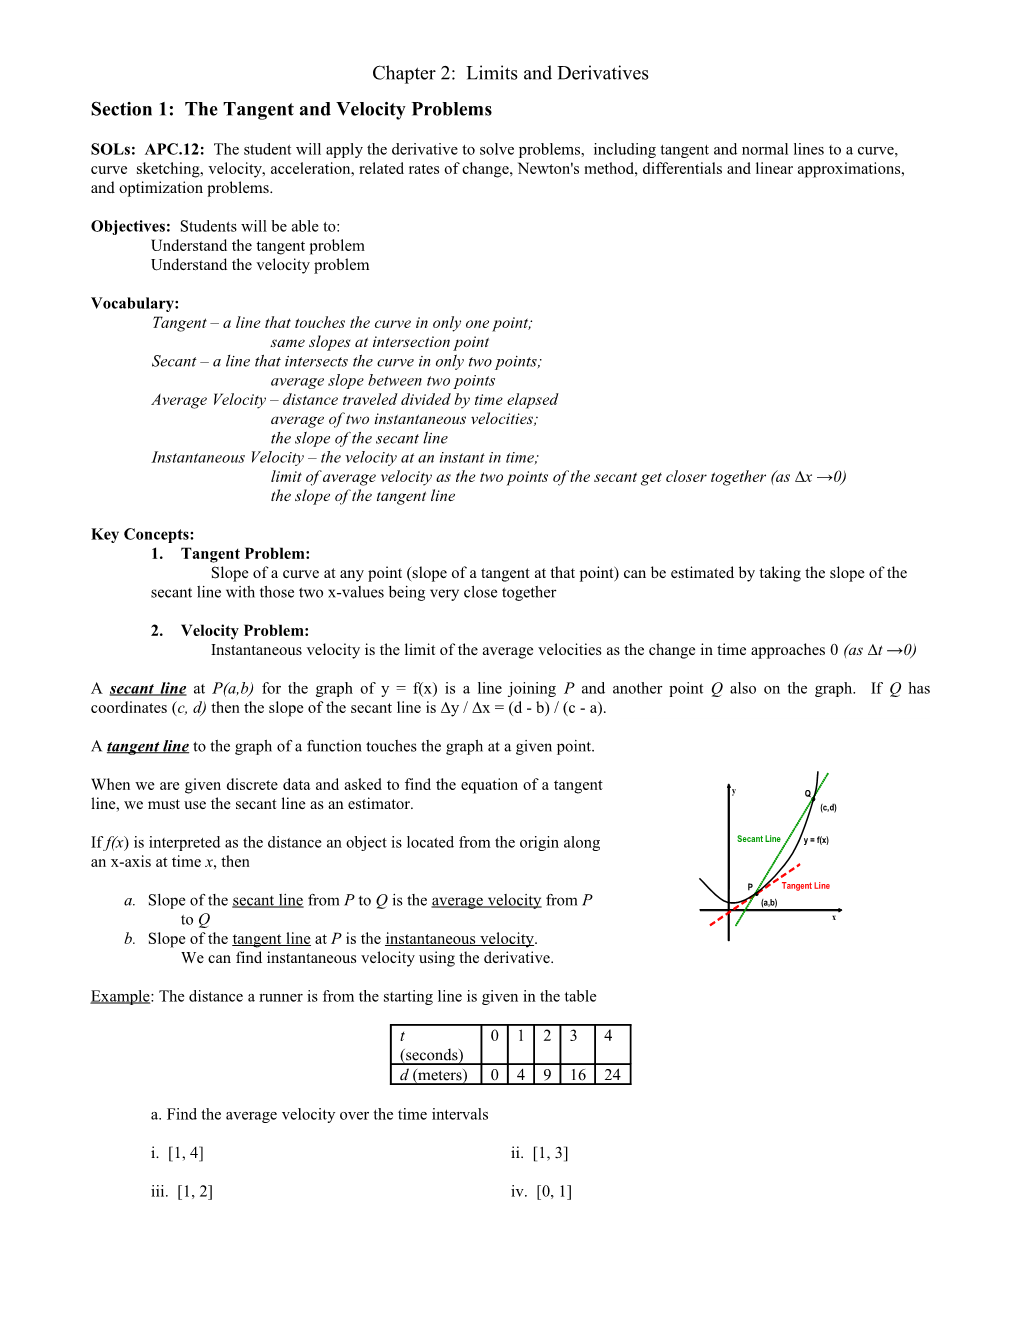 Section 1: the Tangent and Velocity Problems